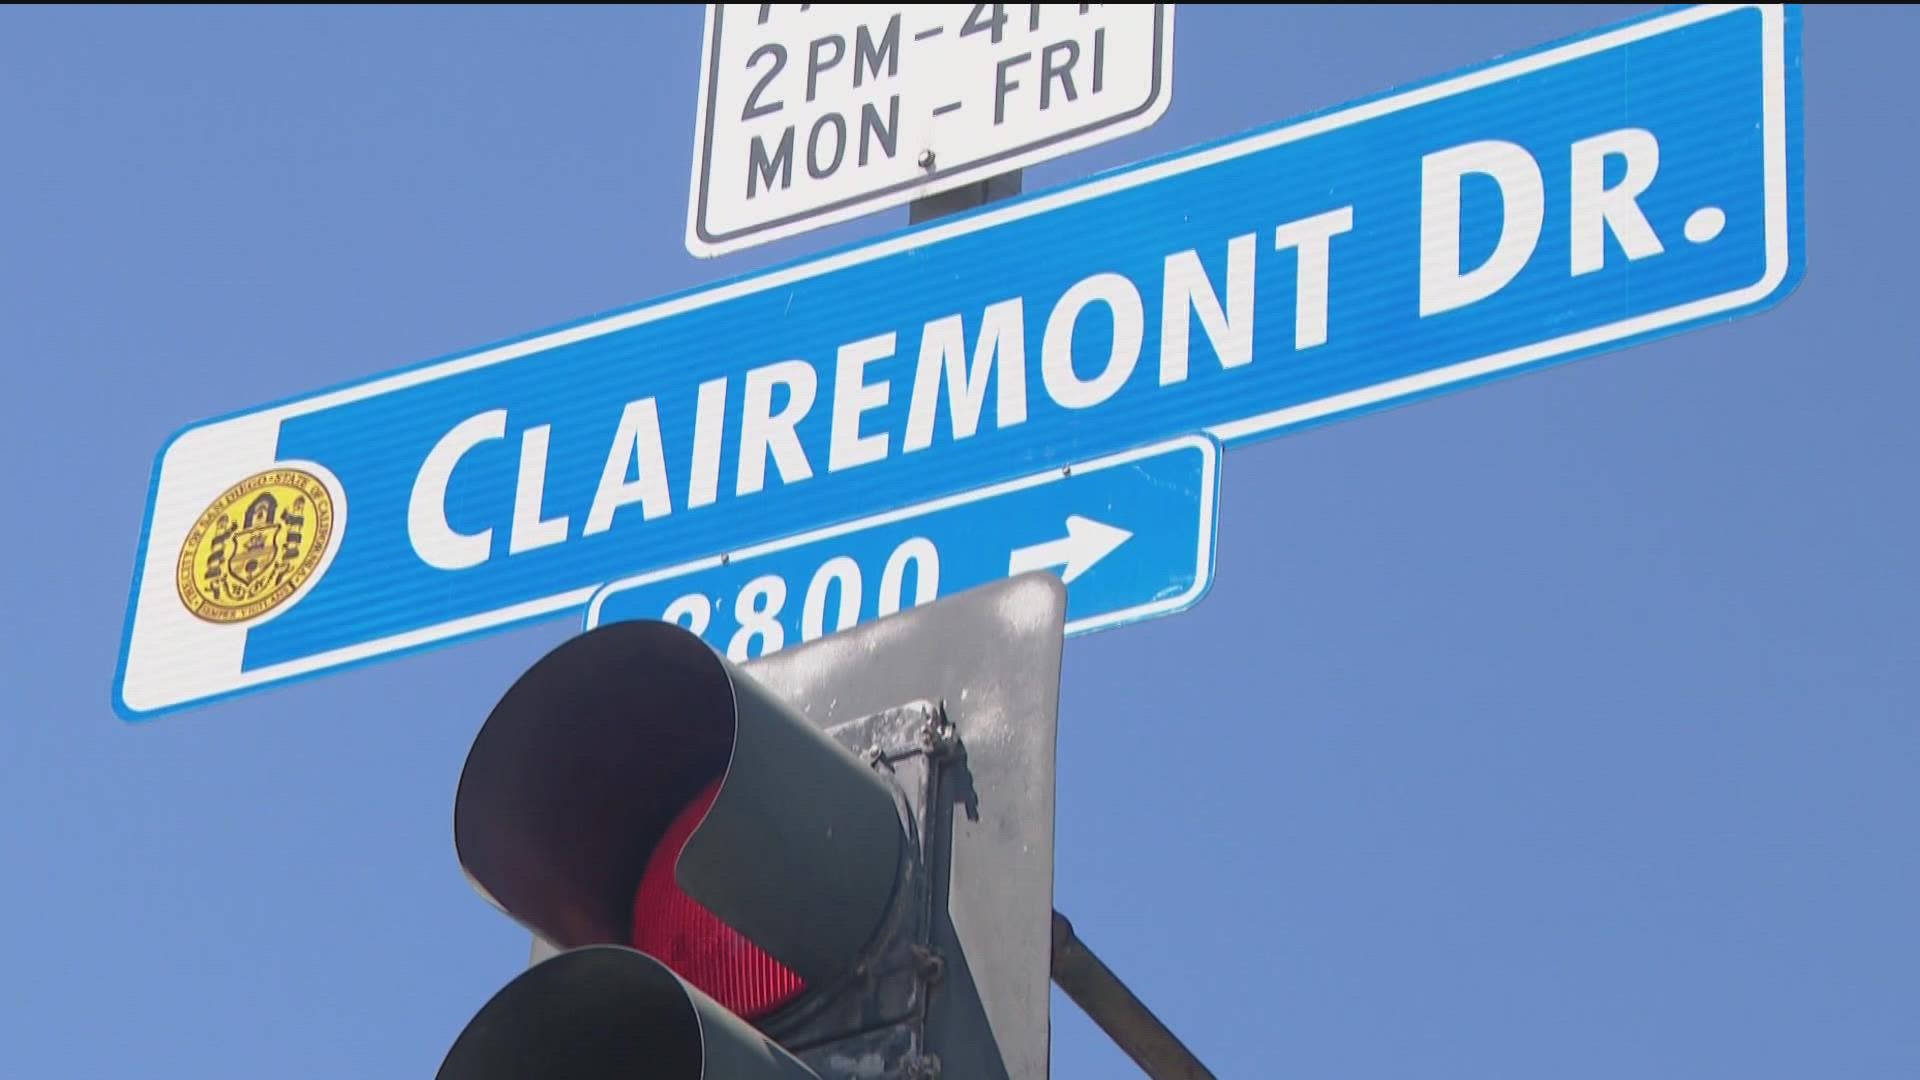 To exacerbate traffic and parking issues, several new apartment complexes are being built along an already-congested Clairemont Drive.